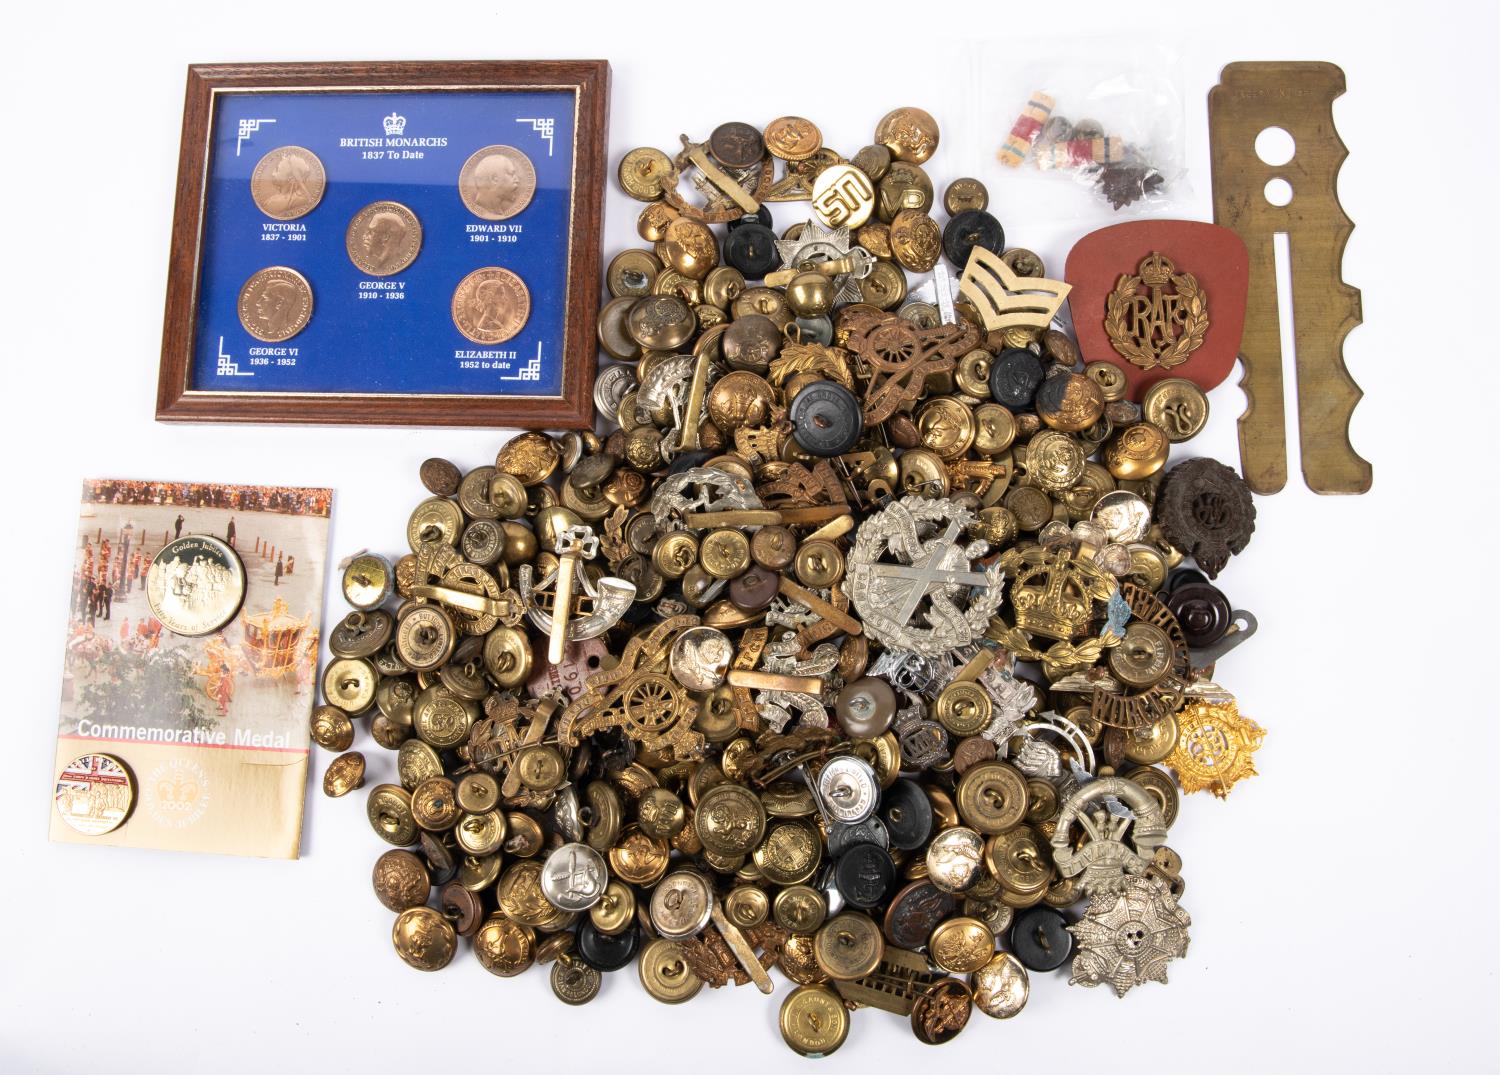 28 British cap badges, also a quantity of various buttons. GC £30-35